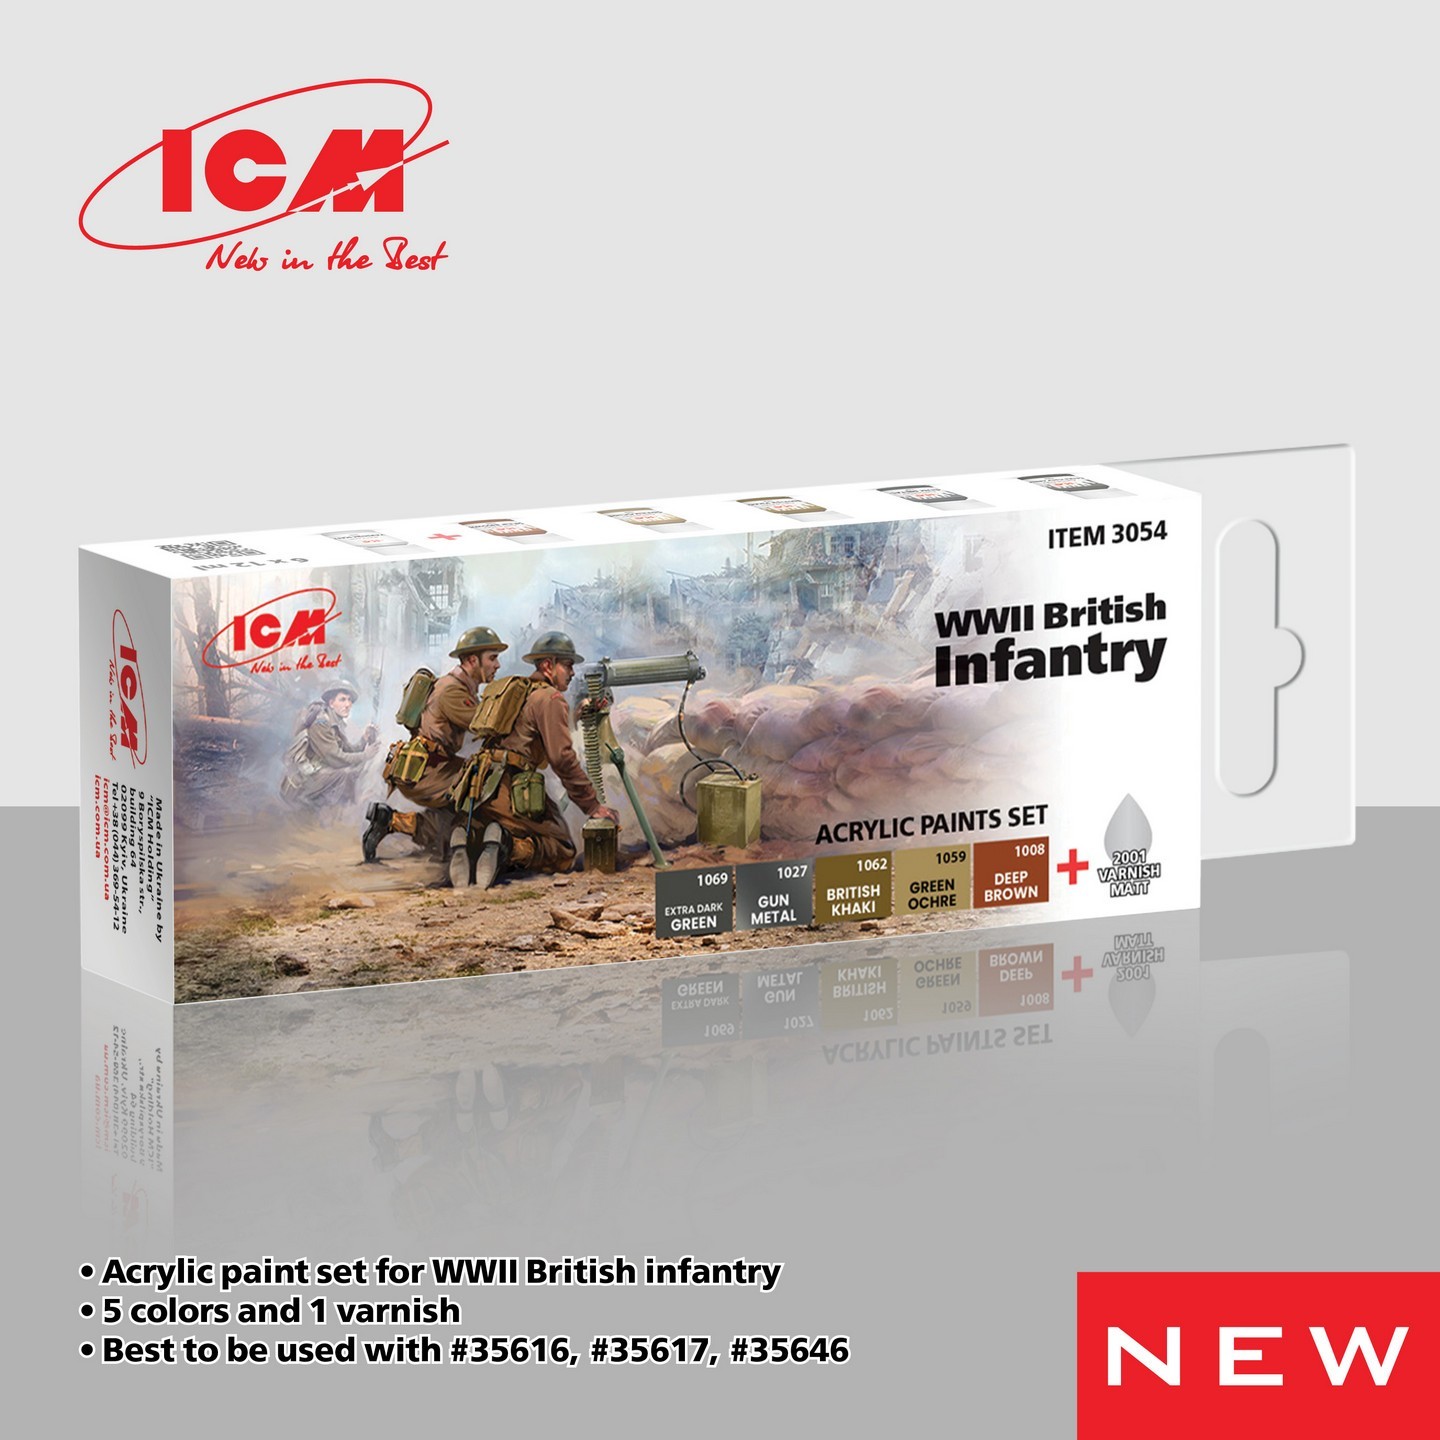 Acrylic paints set for WWII British infantry